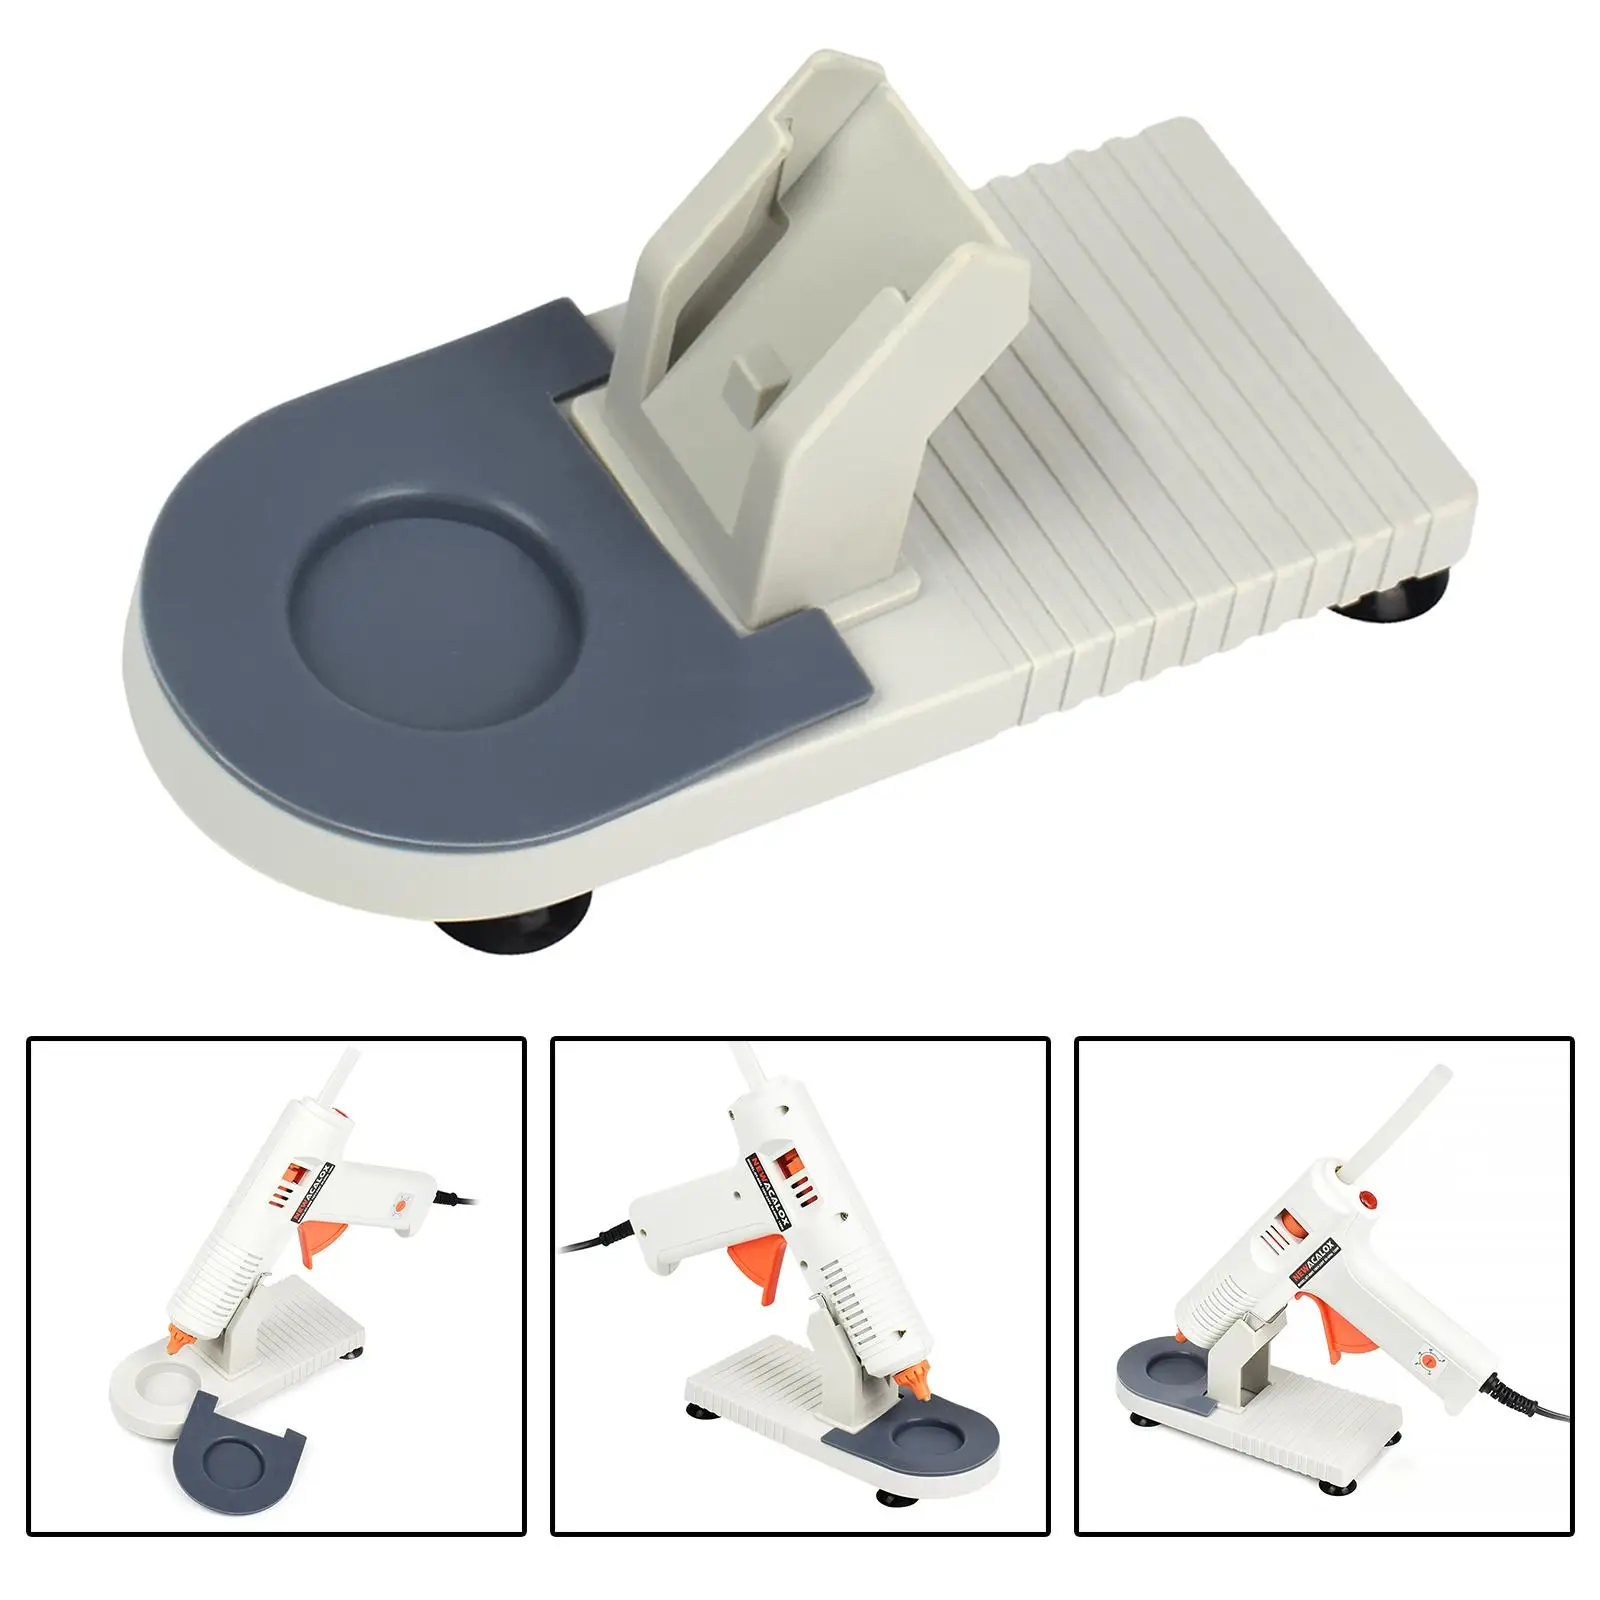 1PC Base ABS Sturdy Grey Durable Portable Storage Rack DIY Hot Glue Gun Stand for Household Melt Machine Hobbyists Electricians